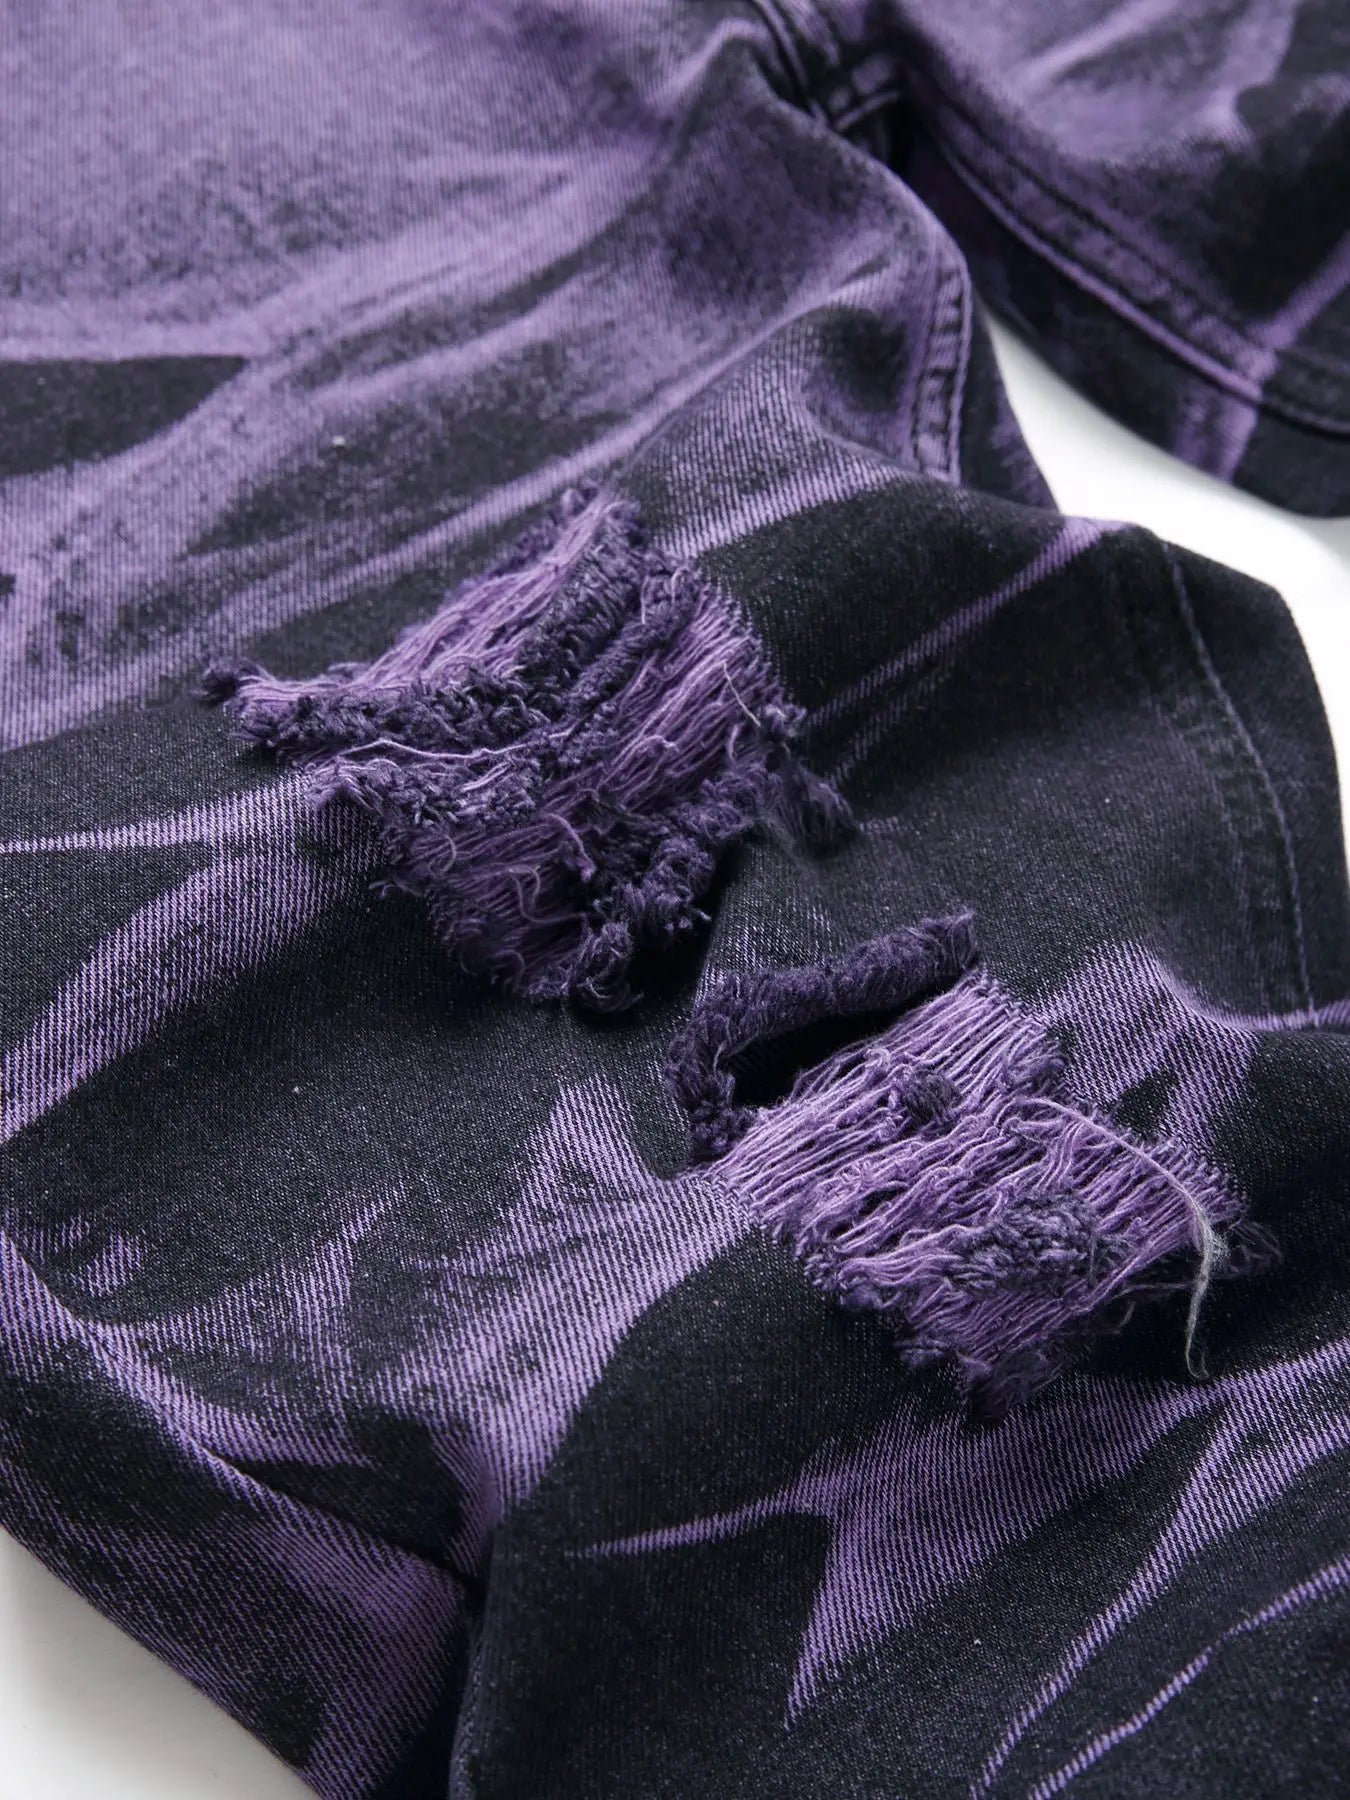 Ripped Black Purple Jeans For Men - Rahbeel